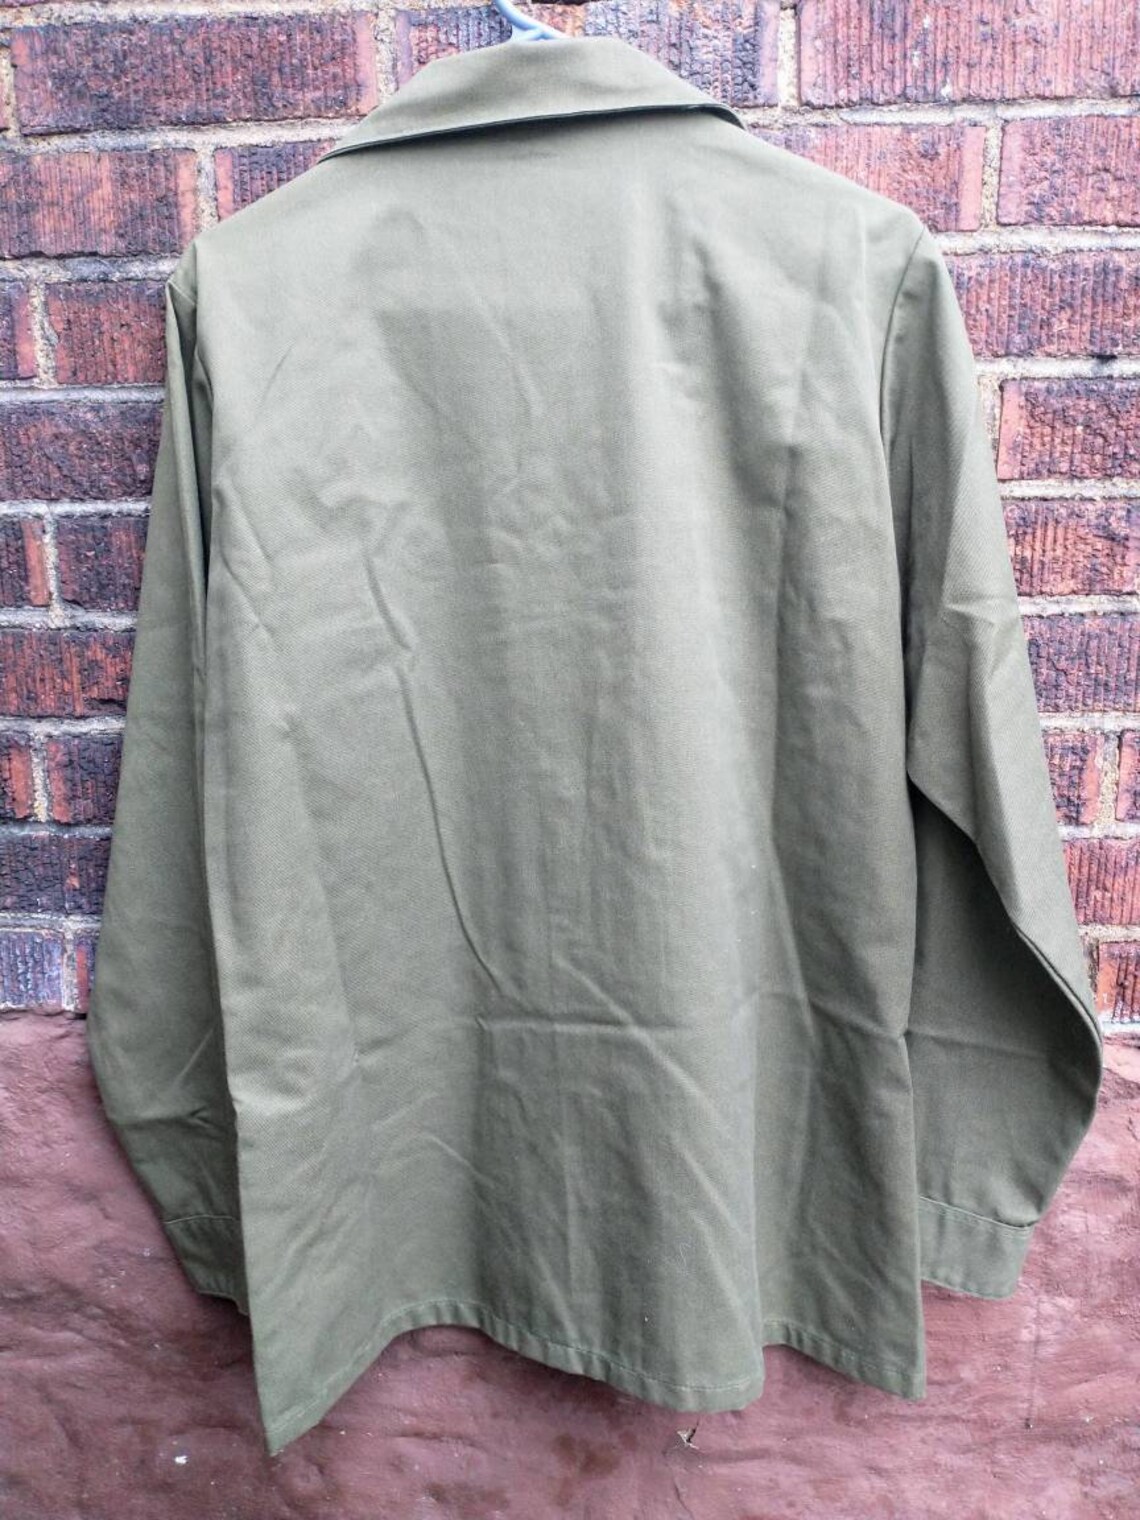 U.S Navy Seabees Vintage Button up Men's Shirt OD Green Good Condition ...